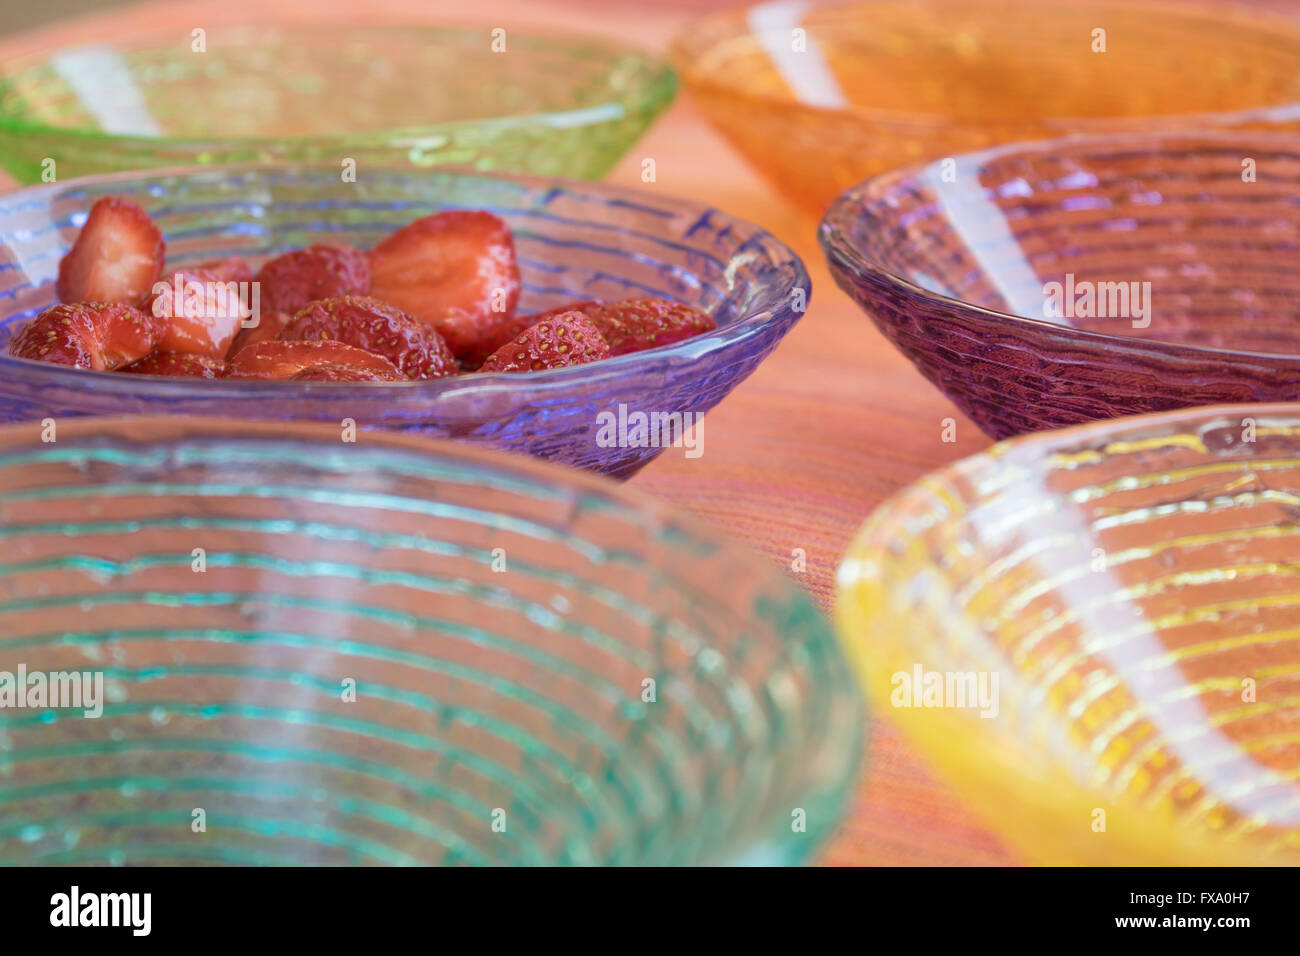 strawberry salad in a sequence of colored glass bowls Stock Photo